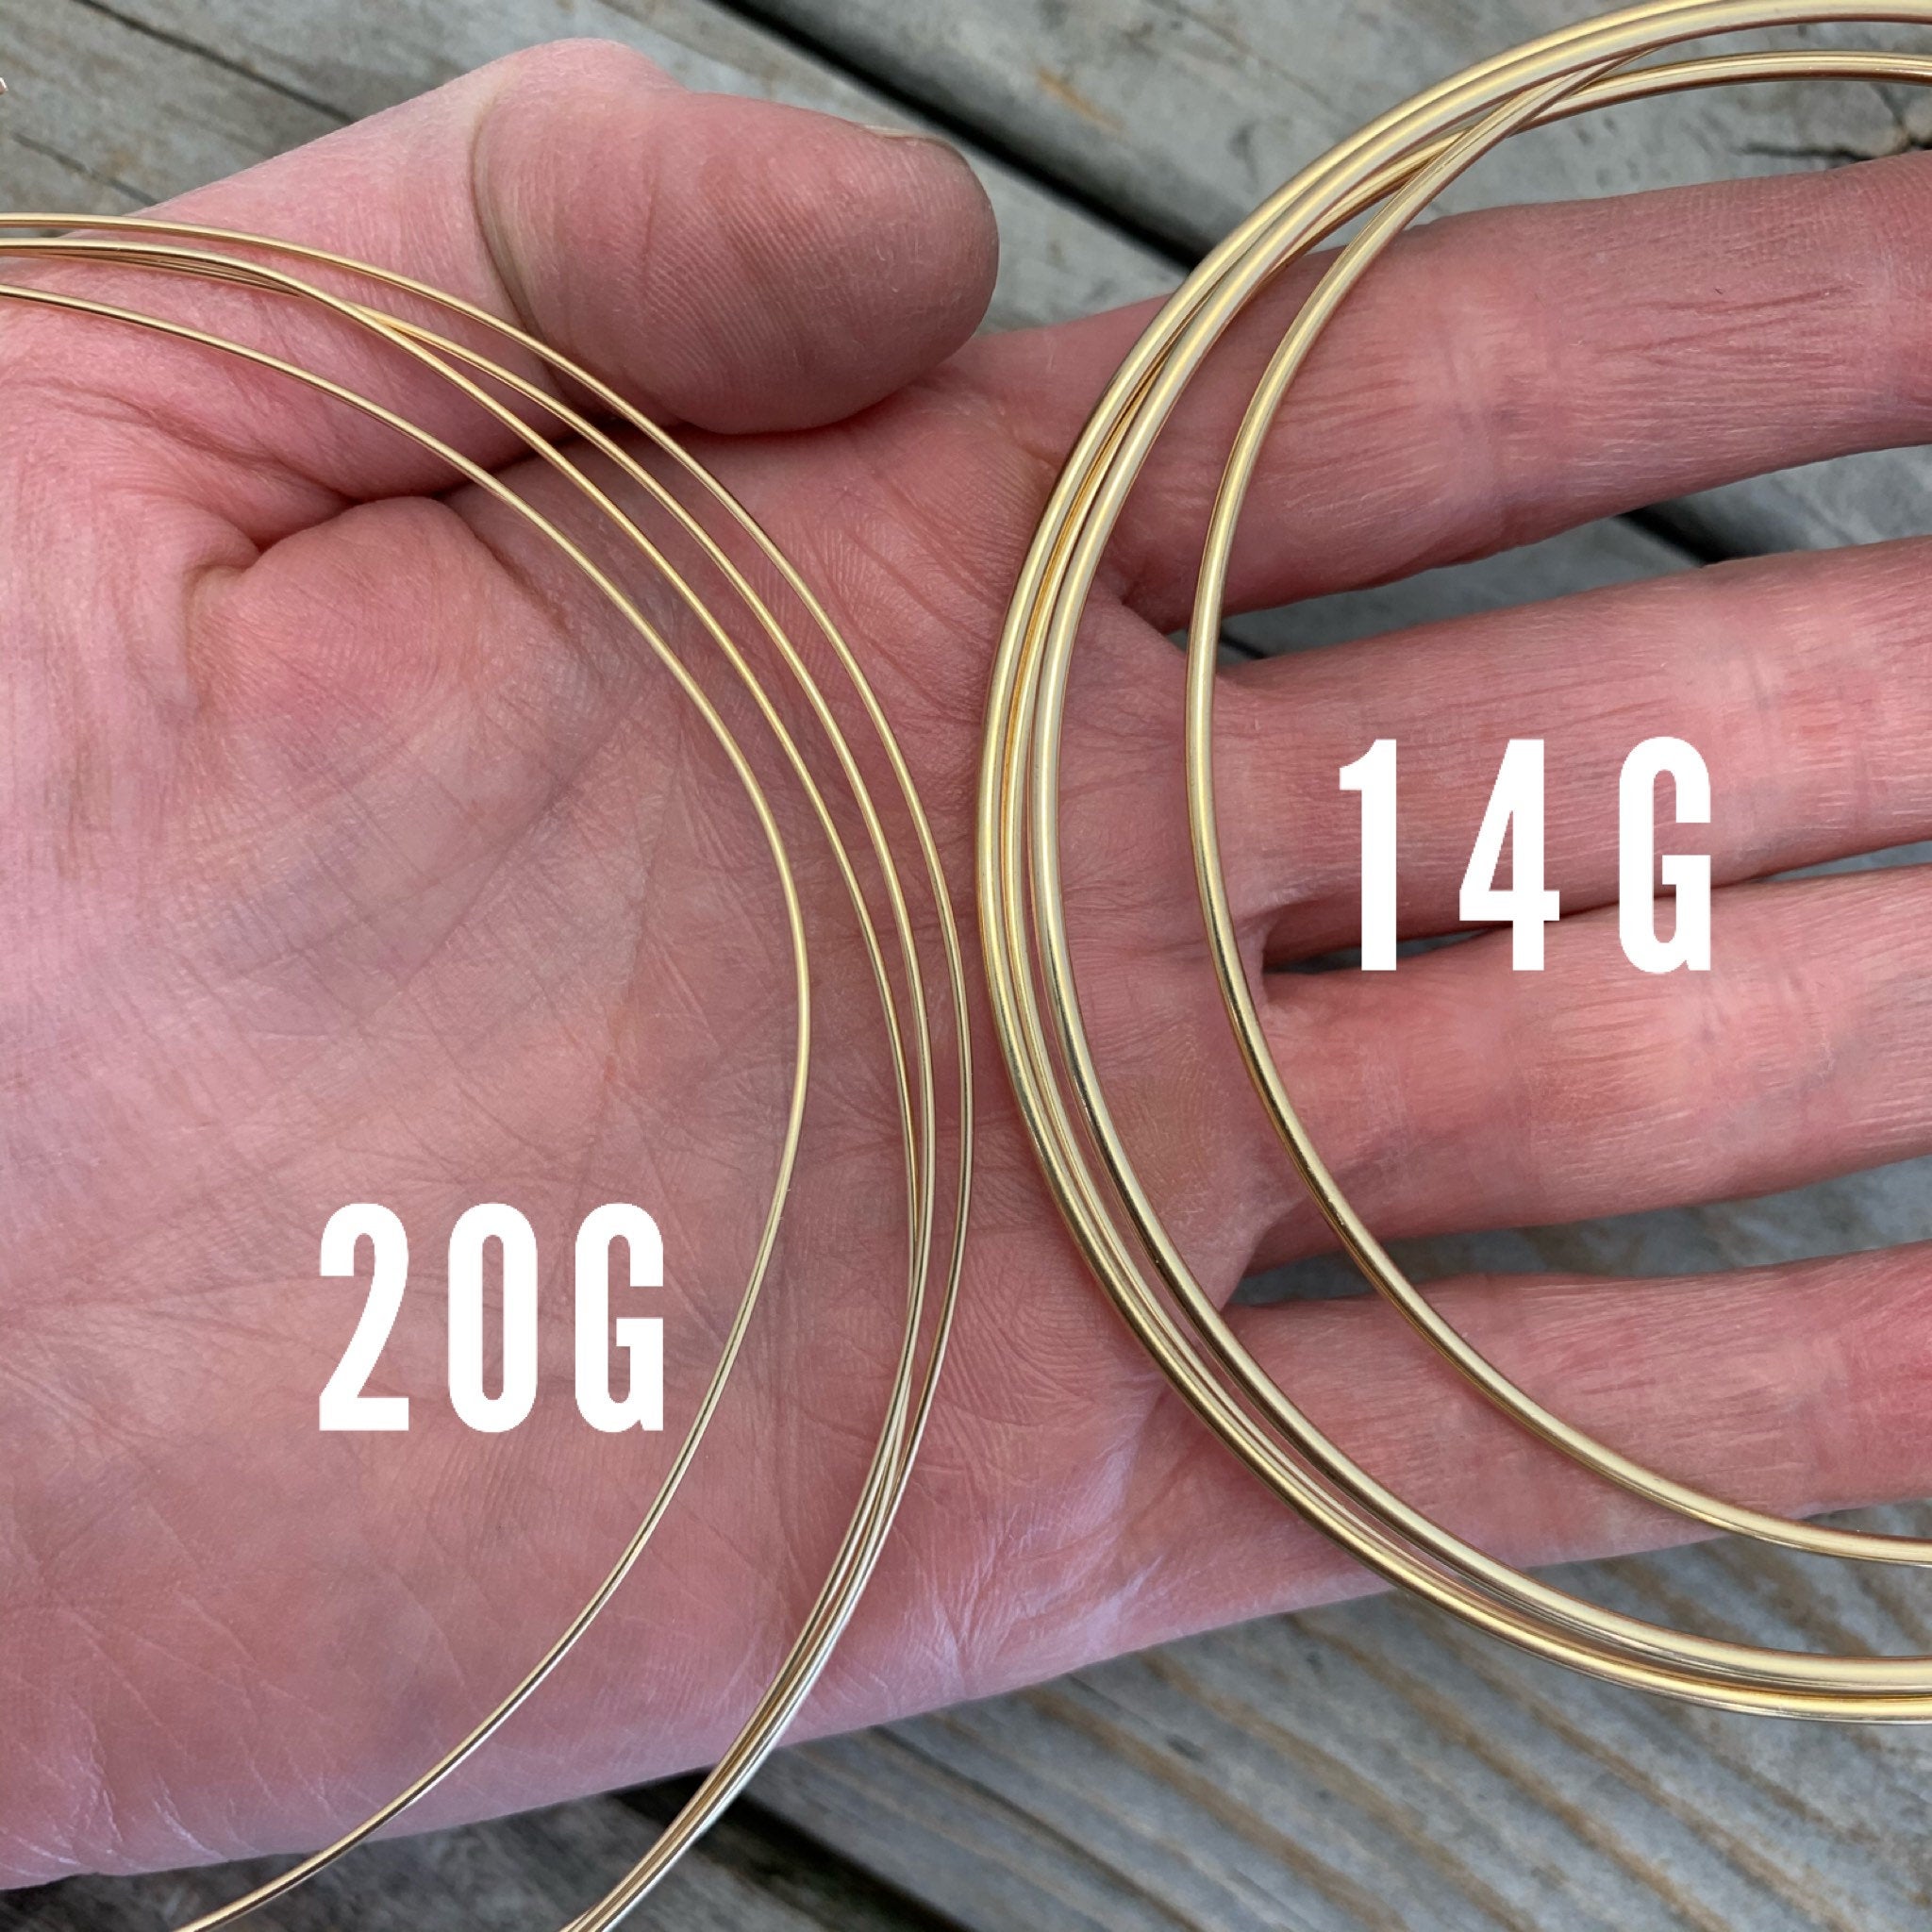 Handmade 22karat solid gold wire 12 inches hard round 20 gauge wire or  jewelry wire for making excellent custom jewelry